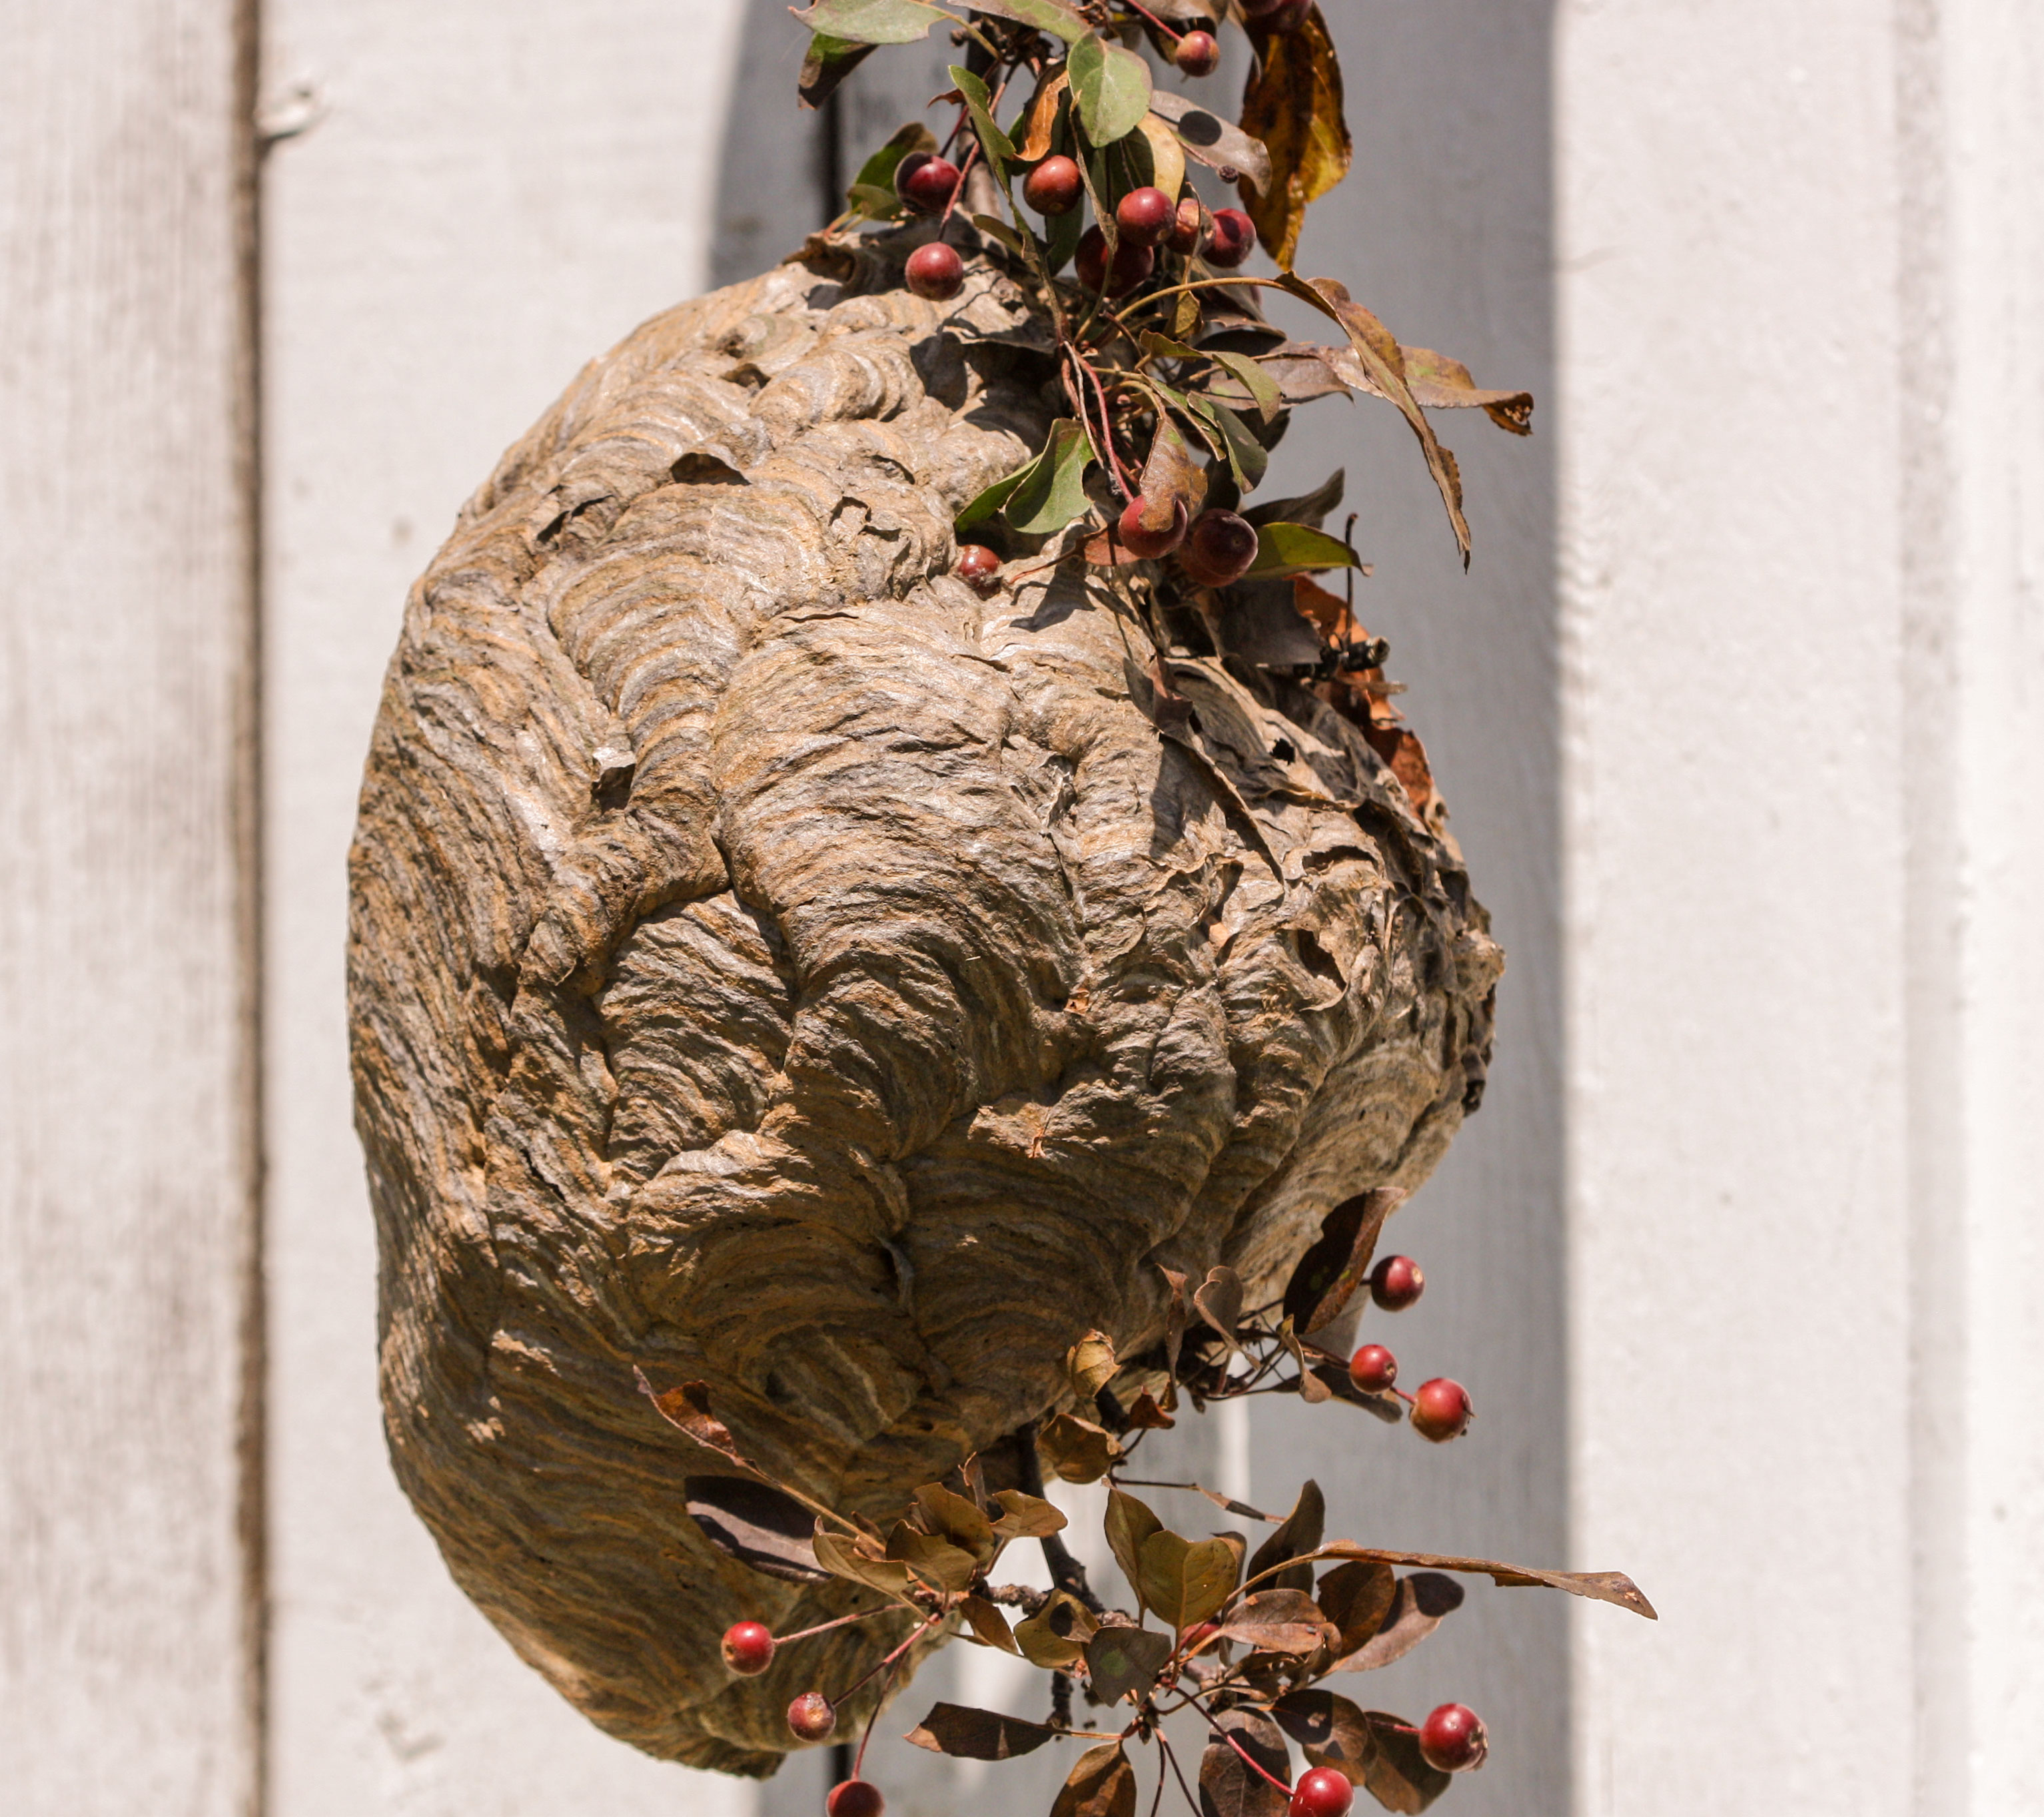 How to get rid of large bees nest in tree